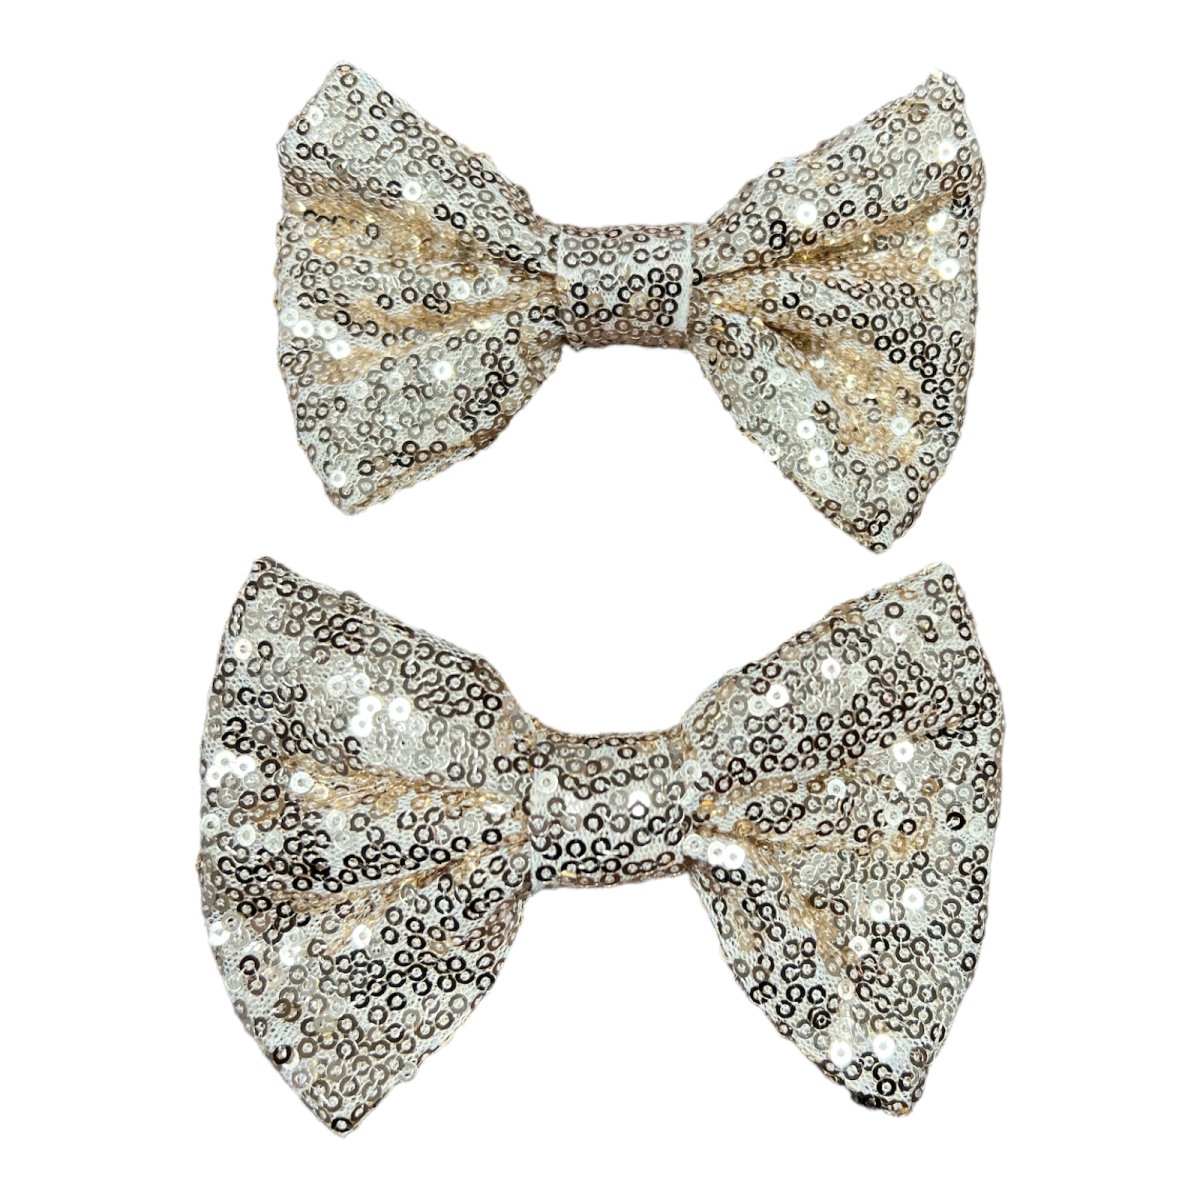 XL SEQUIN BOWS SET OF 2 - CLIPS